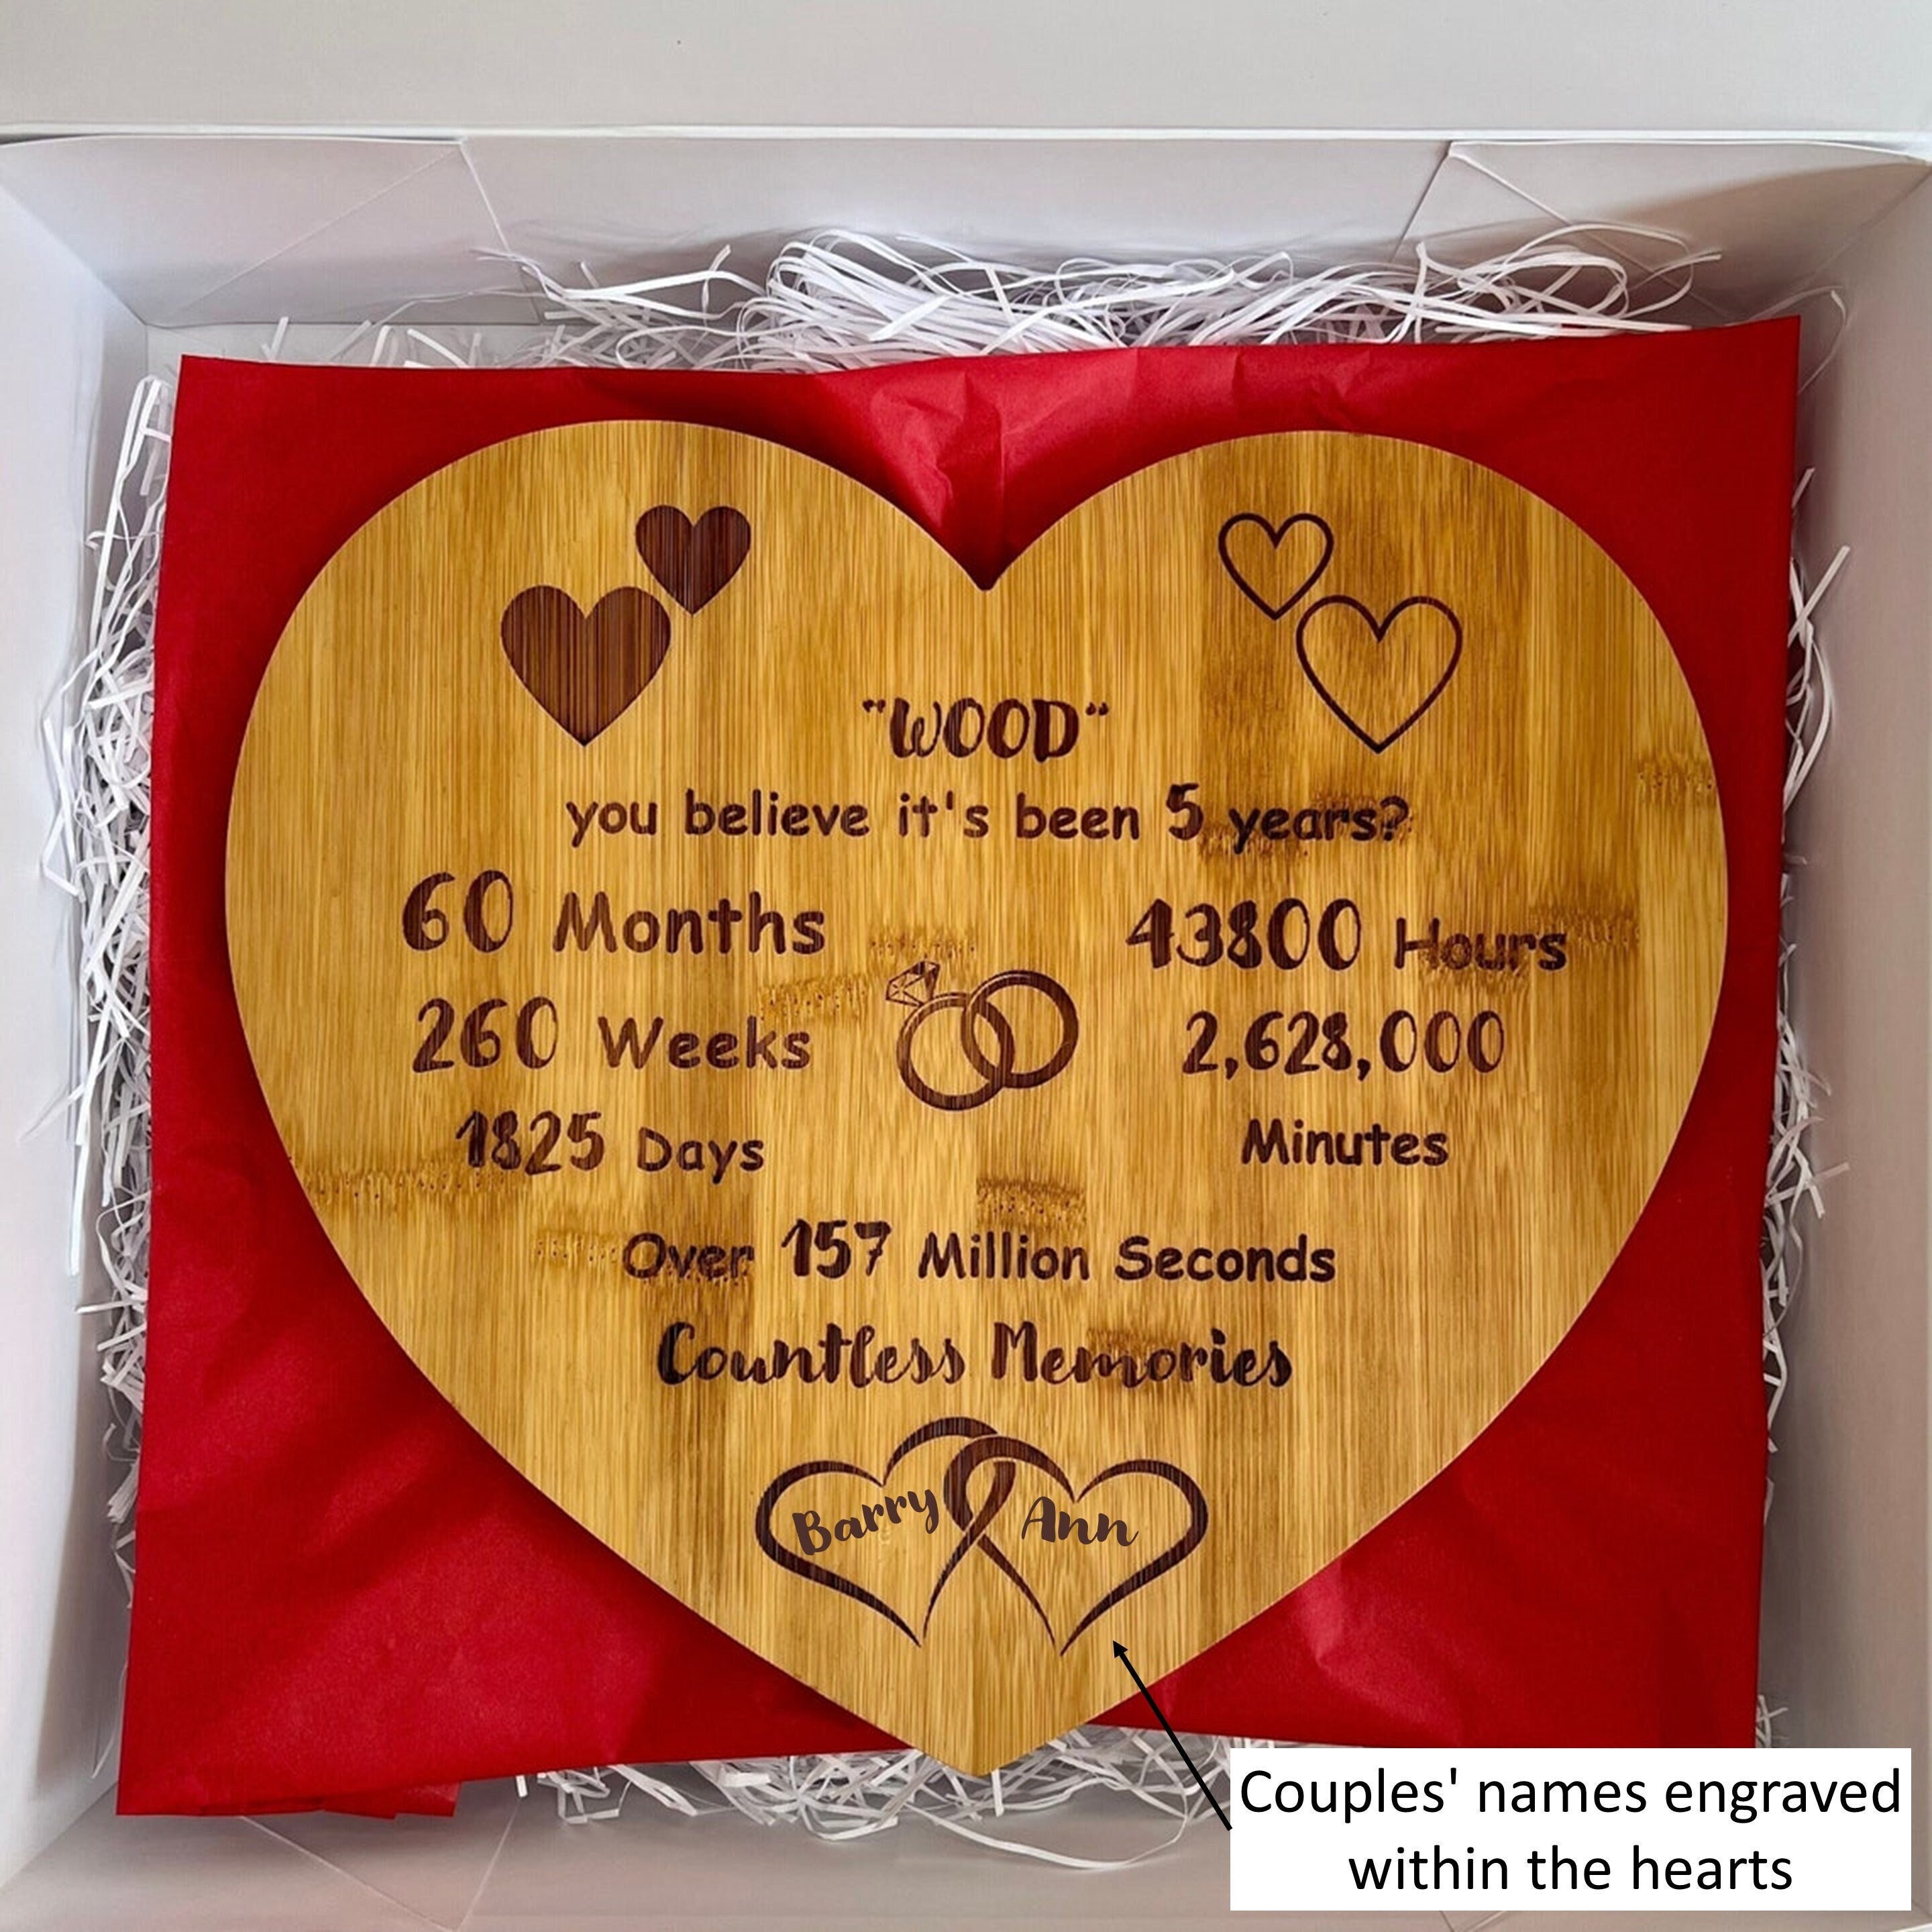 5 Year Anniversary Gift for Him, Wood Anniversary Gifts for Wife, Engraved  Wood Gifts for Men, Husband Anniversary, 5th Anniversary Gift 